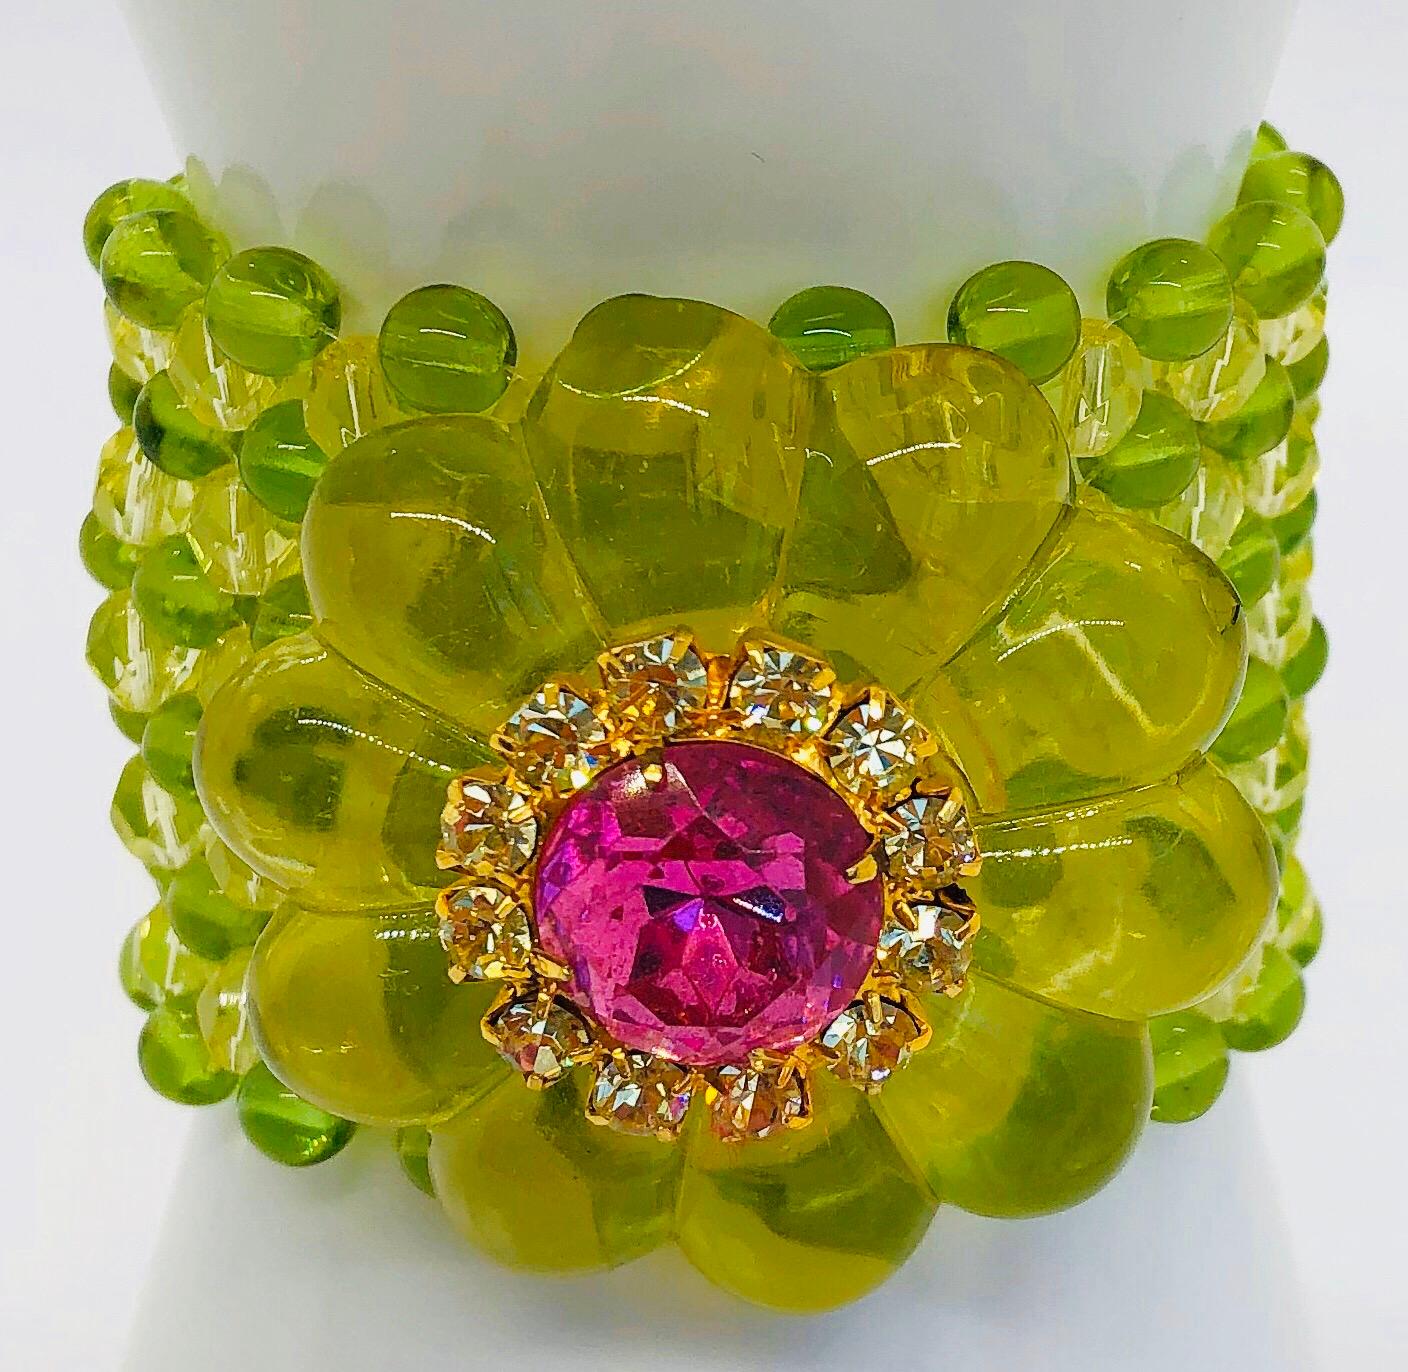 Chic 1960s Neon Lime Green + Hot Pink Lucite Vintage 60s Flower Bracelet Cuff 6